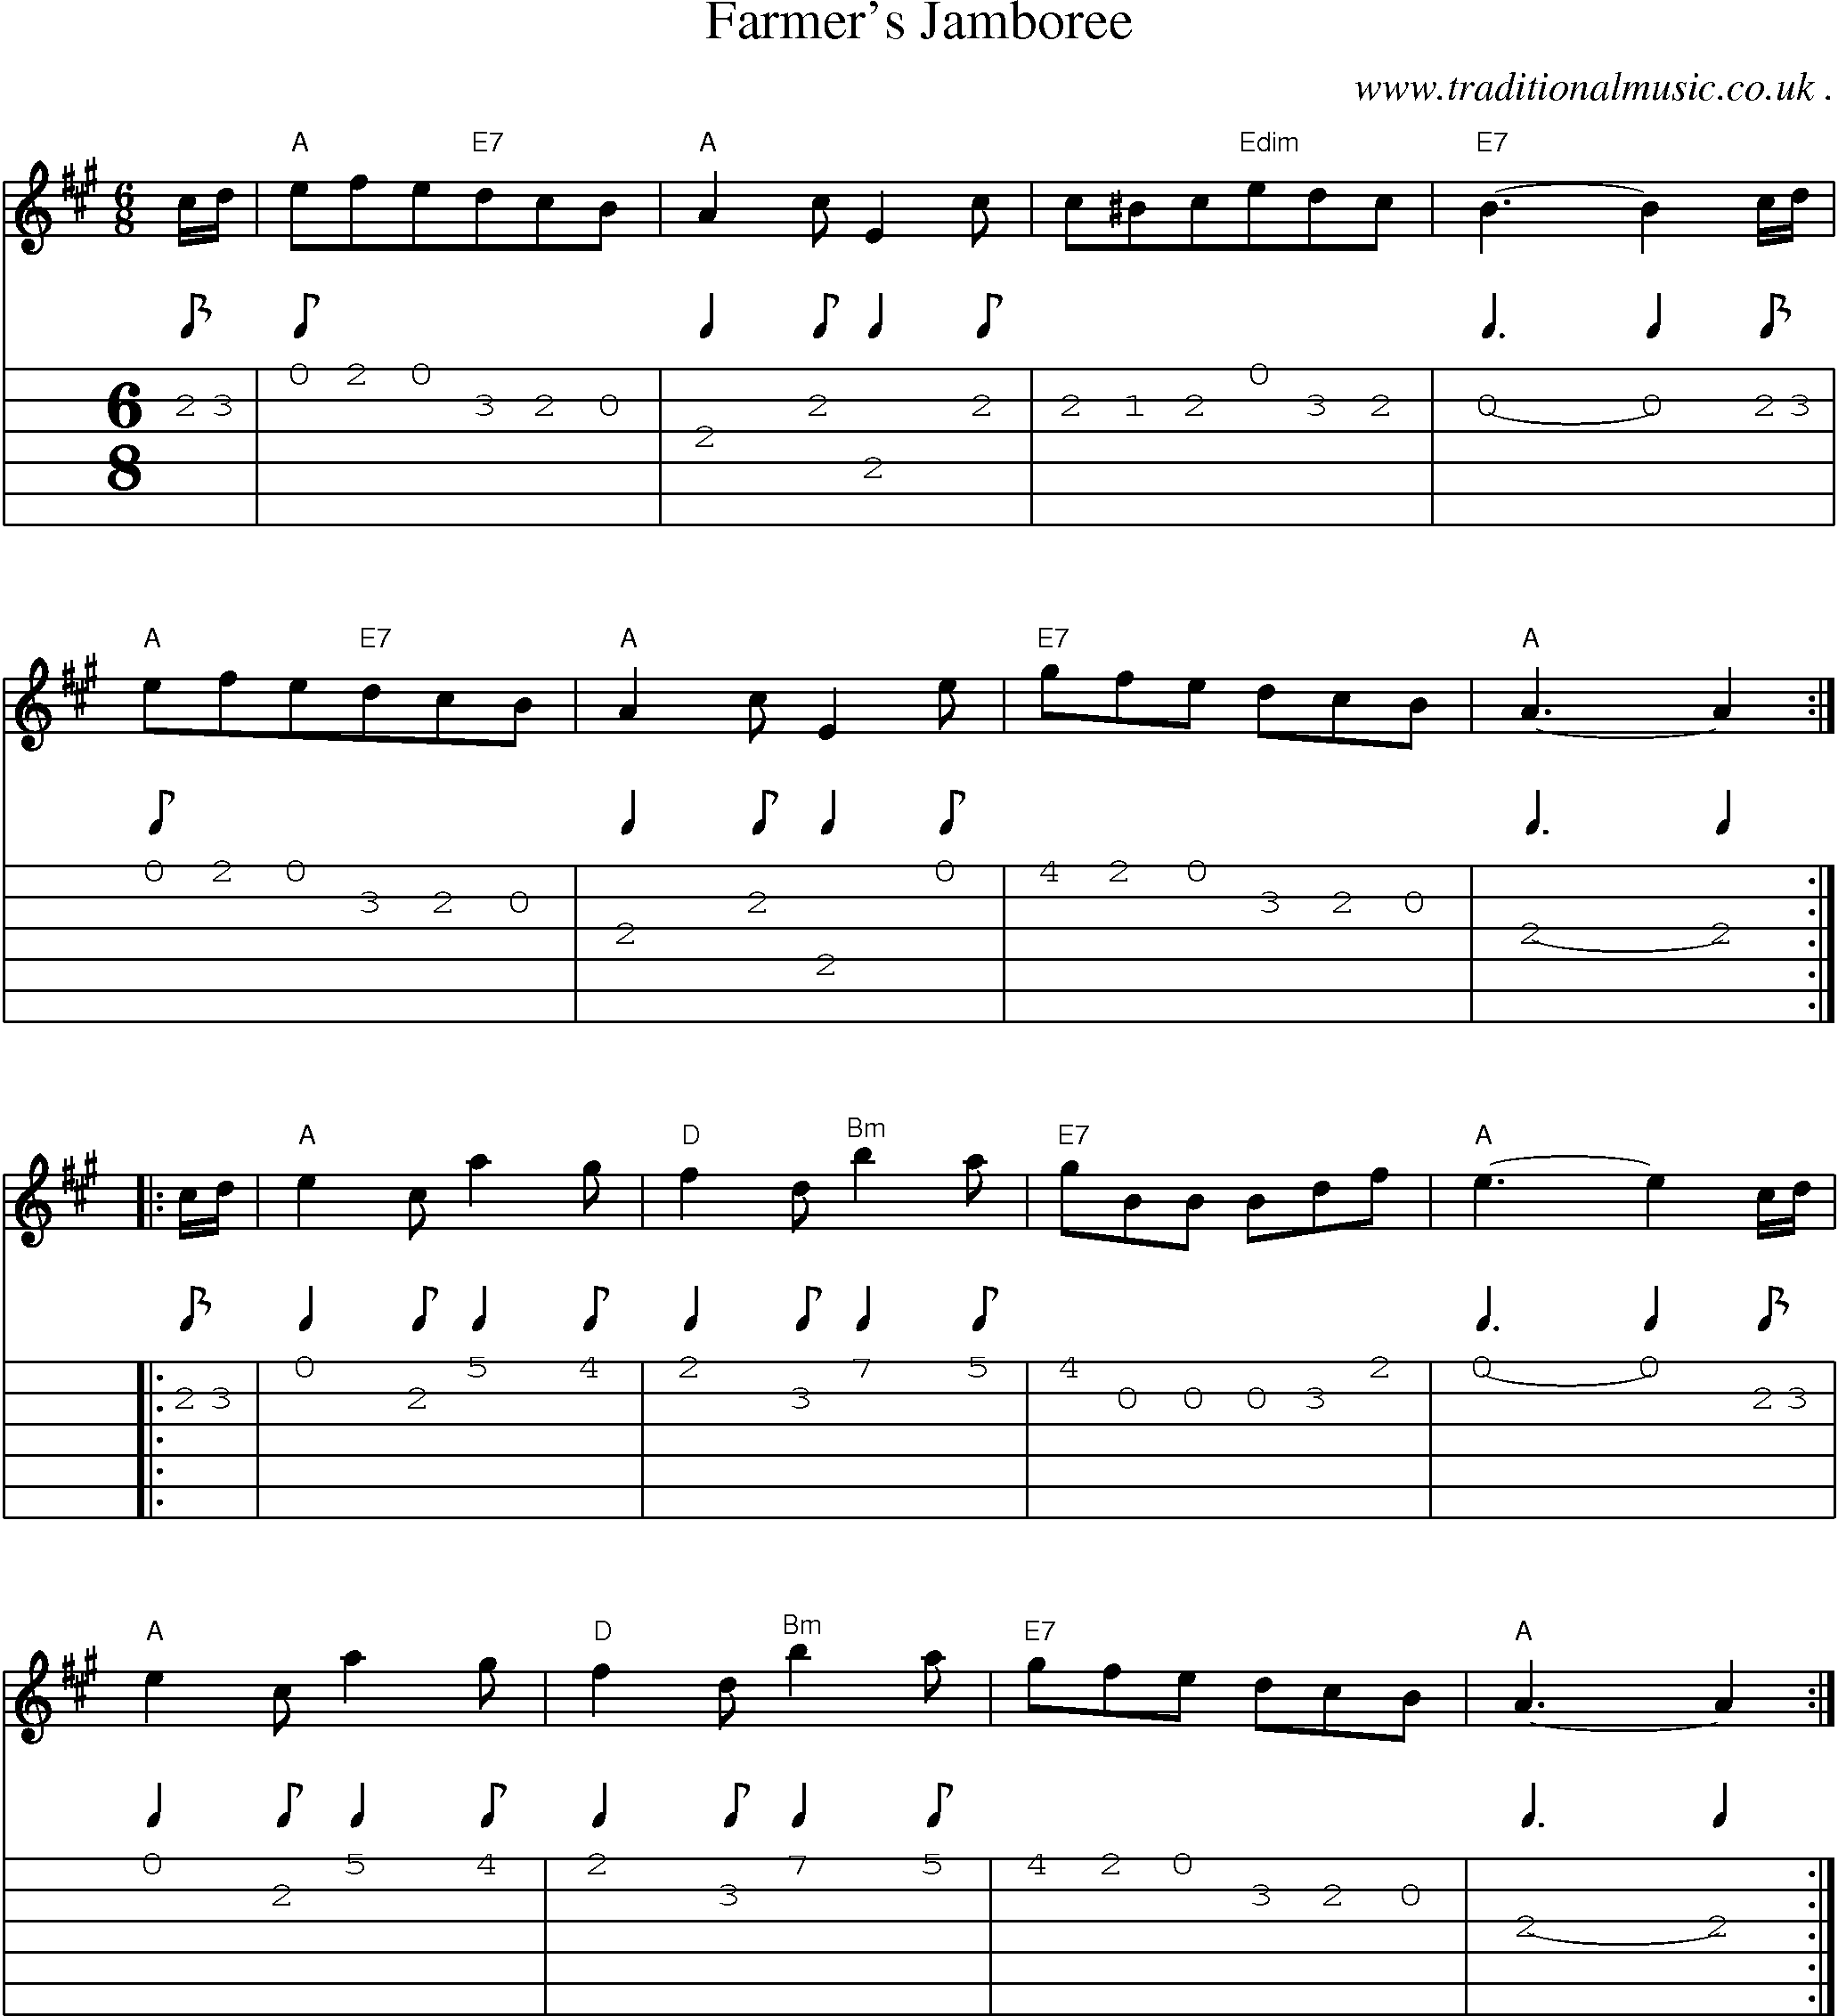 Sheet-Music and Guitar Tabs for Farmers Jamboree